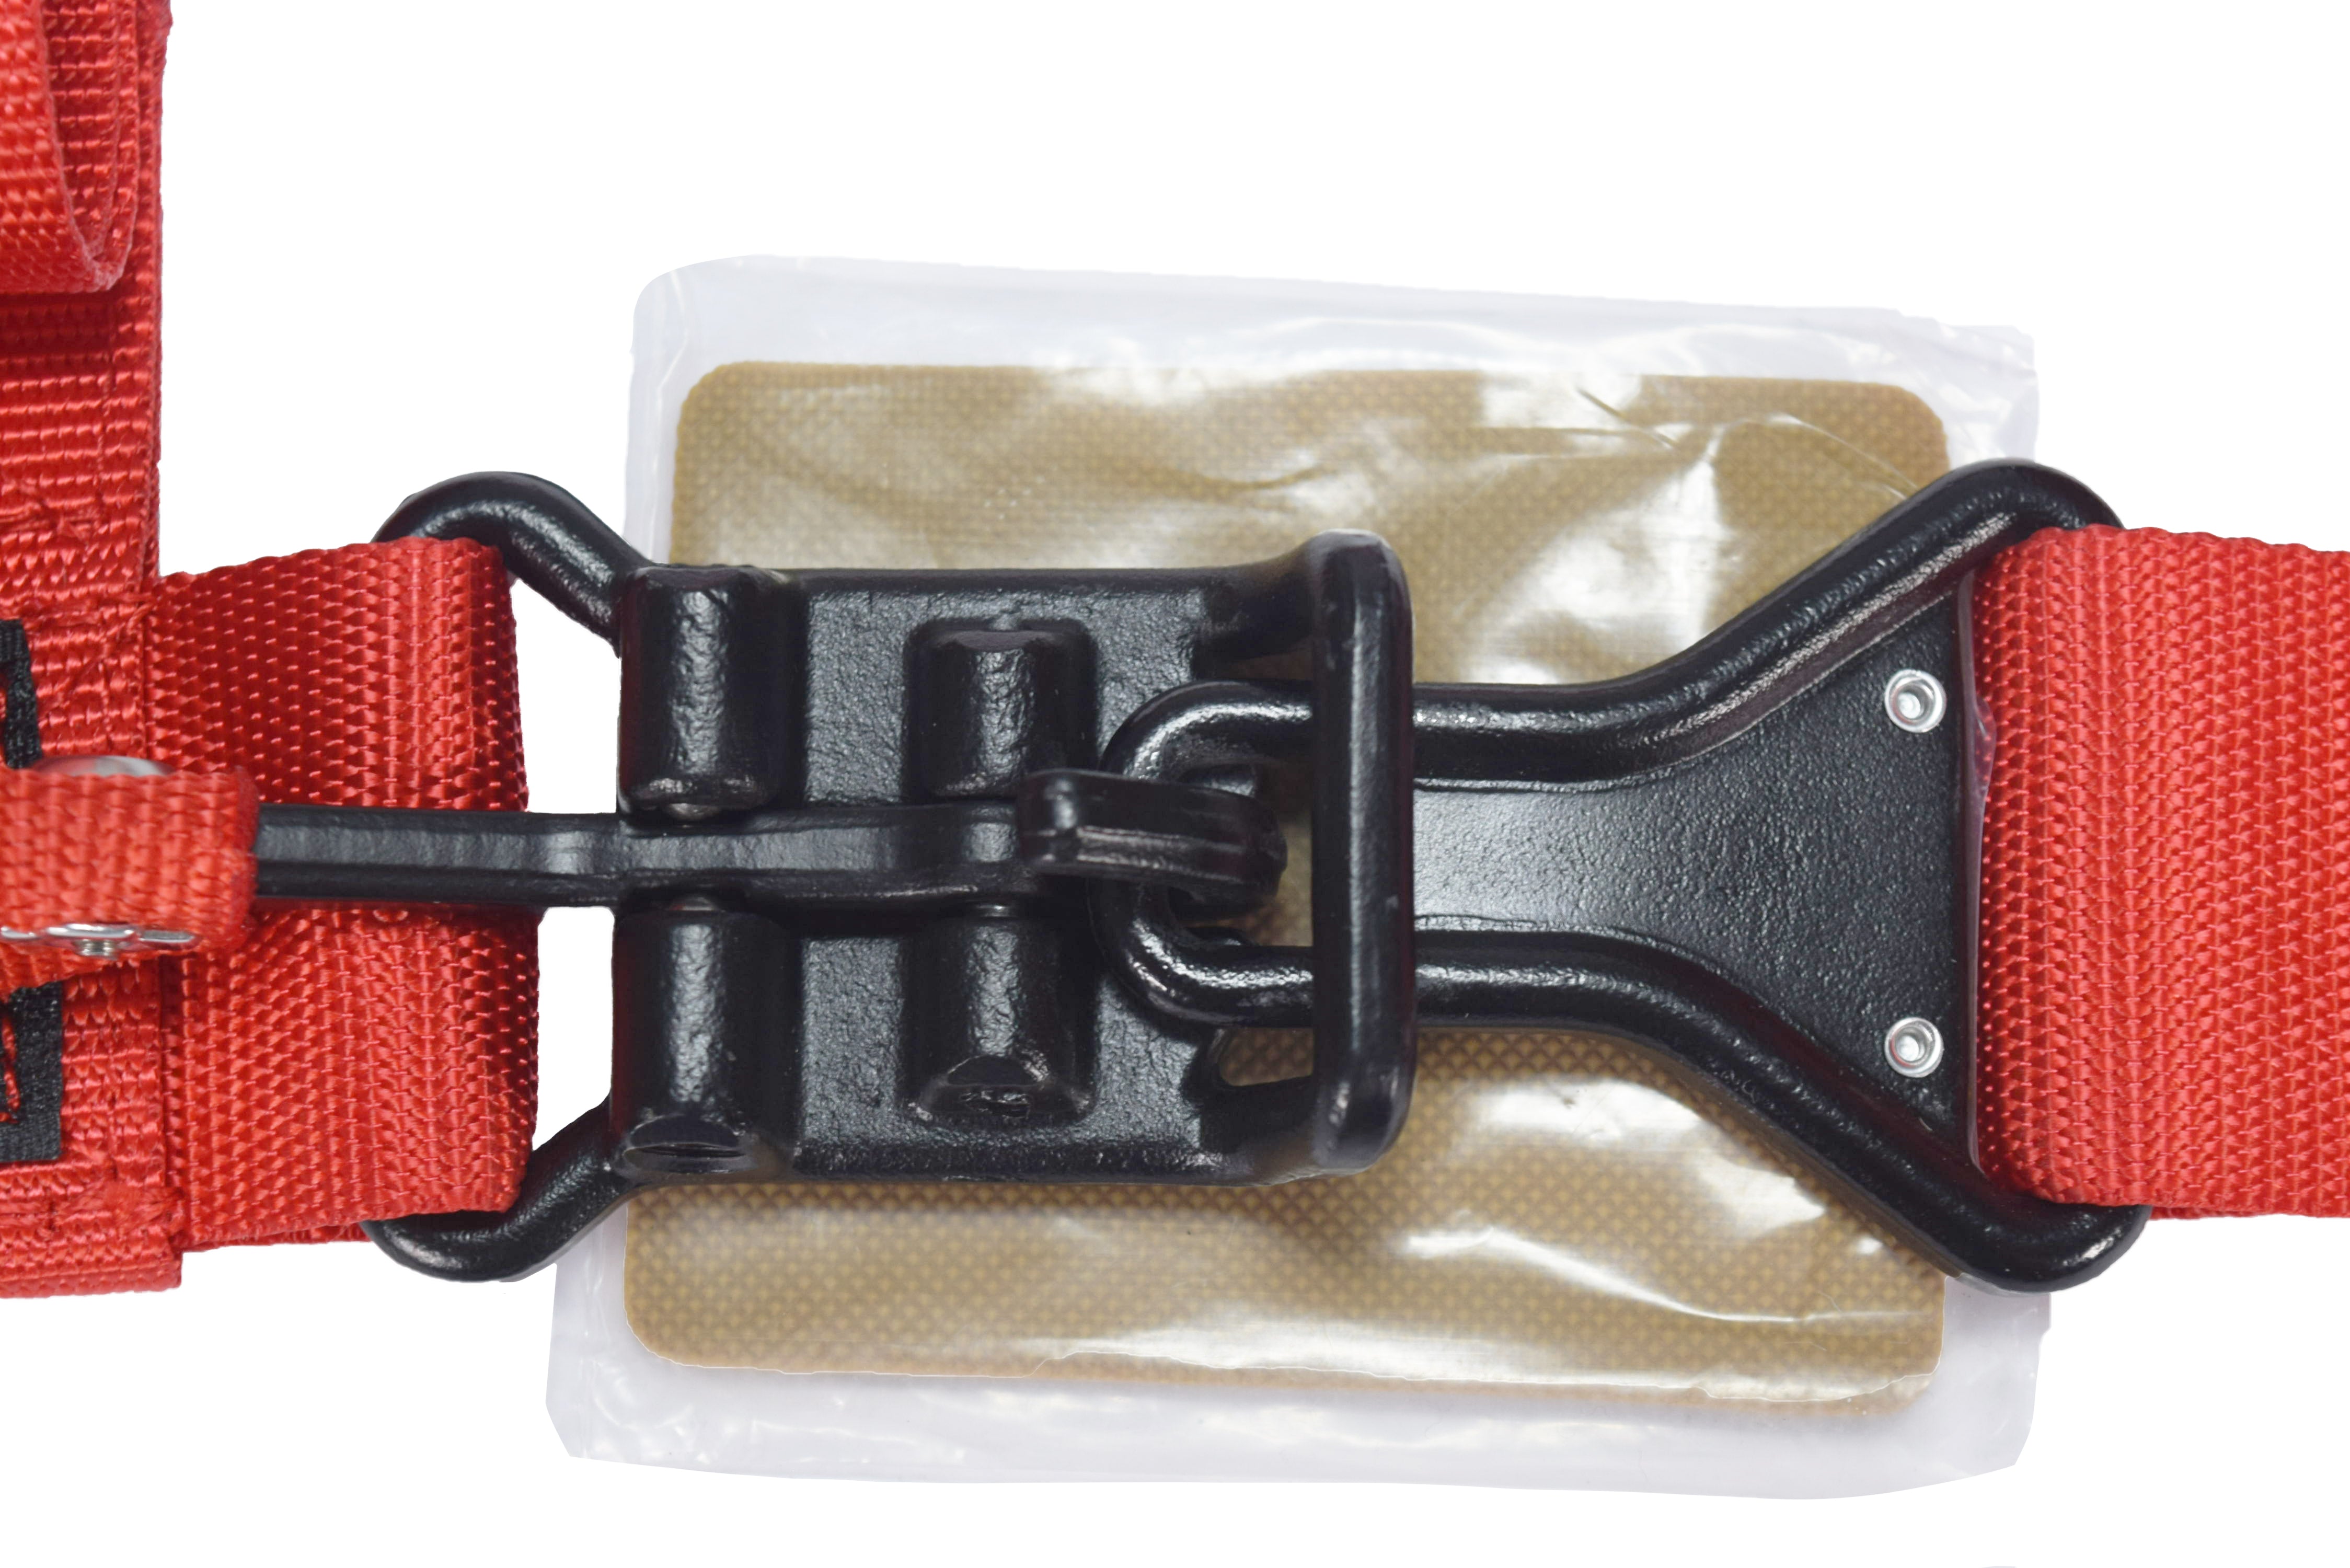 PROGUARD Red 4 Point Universal UTV Off-Road Harness 2" Straps w/ Bypass Clip